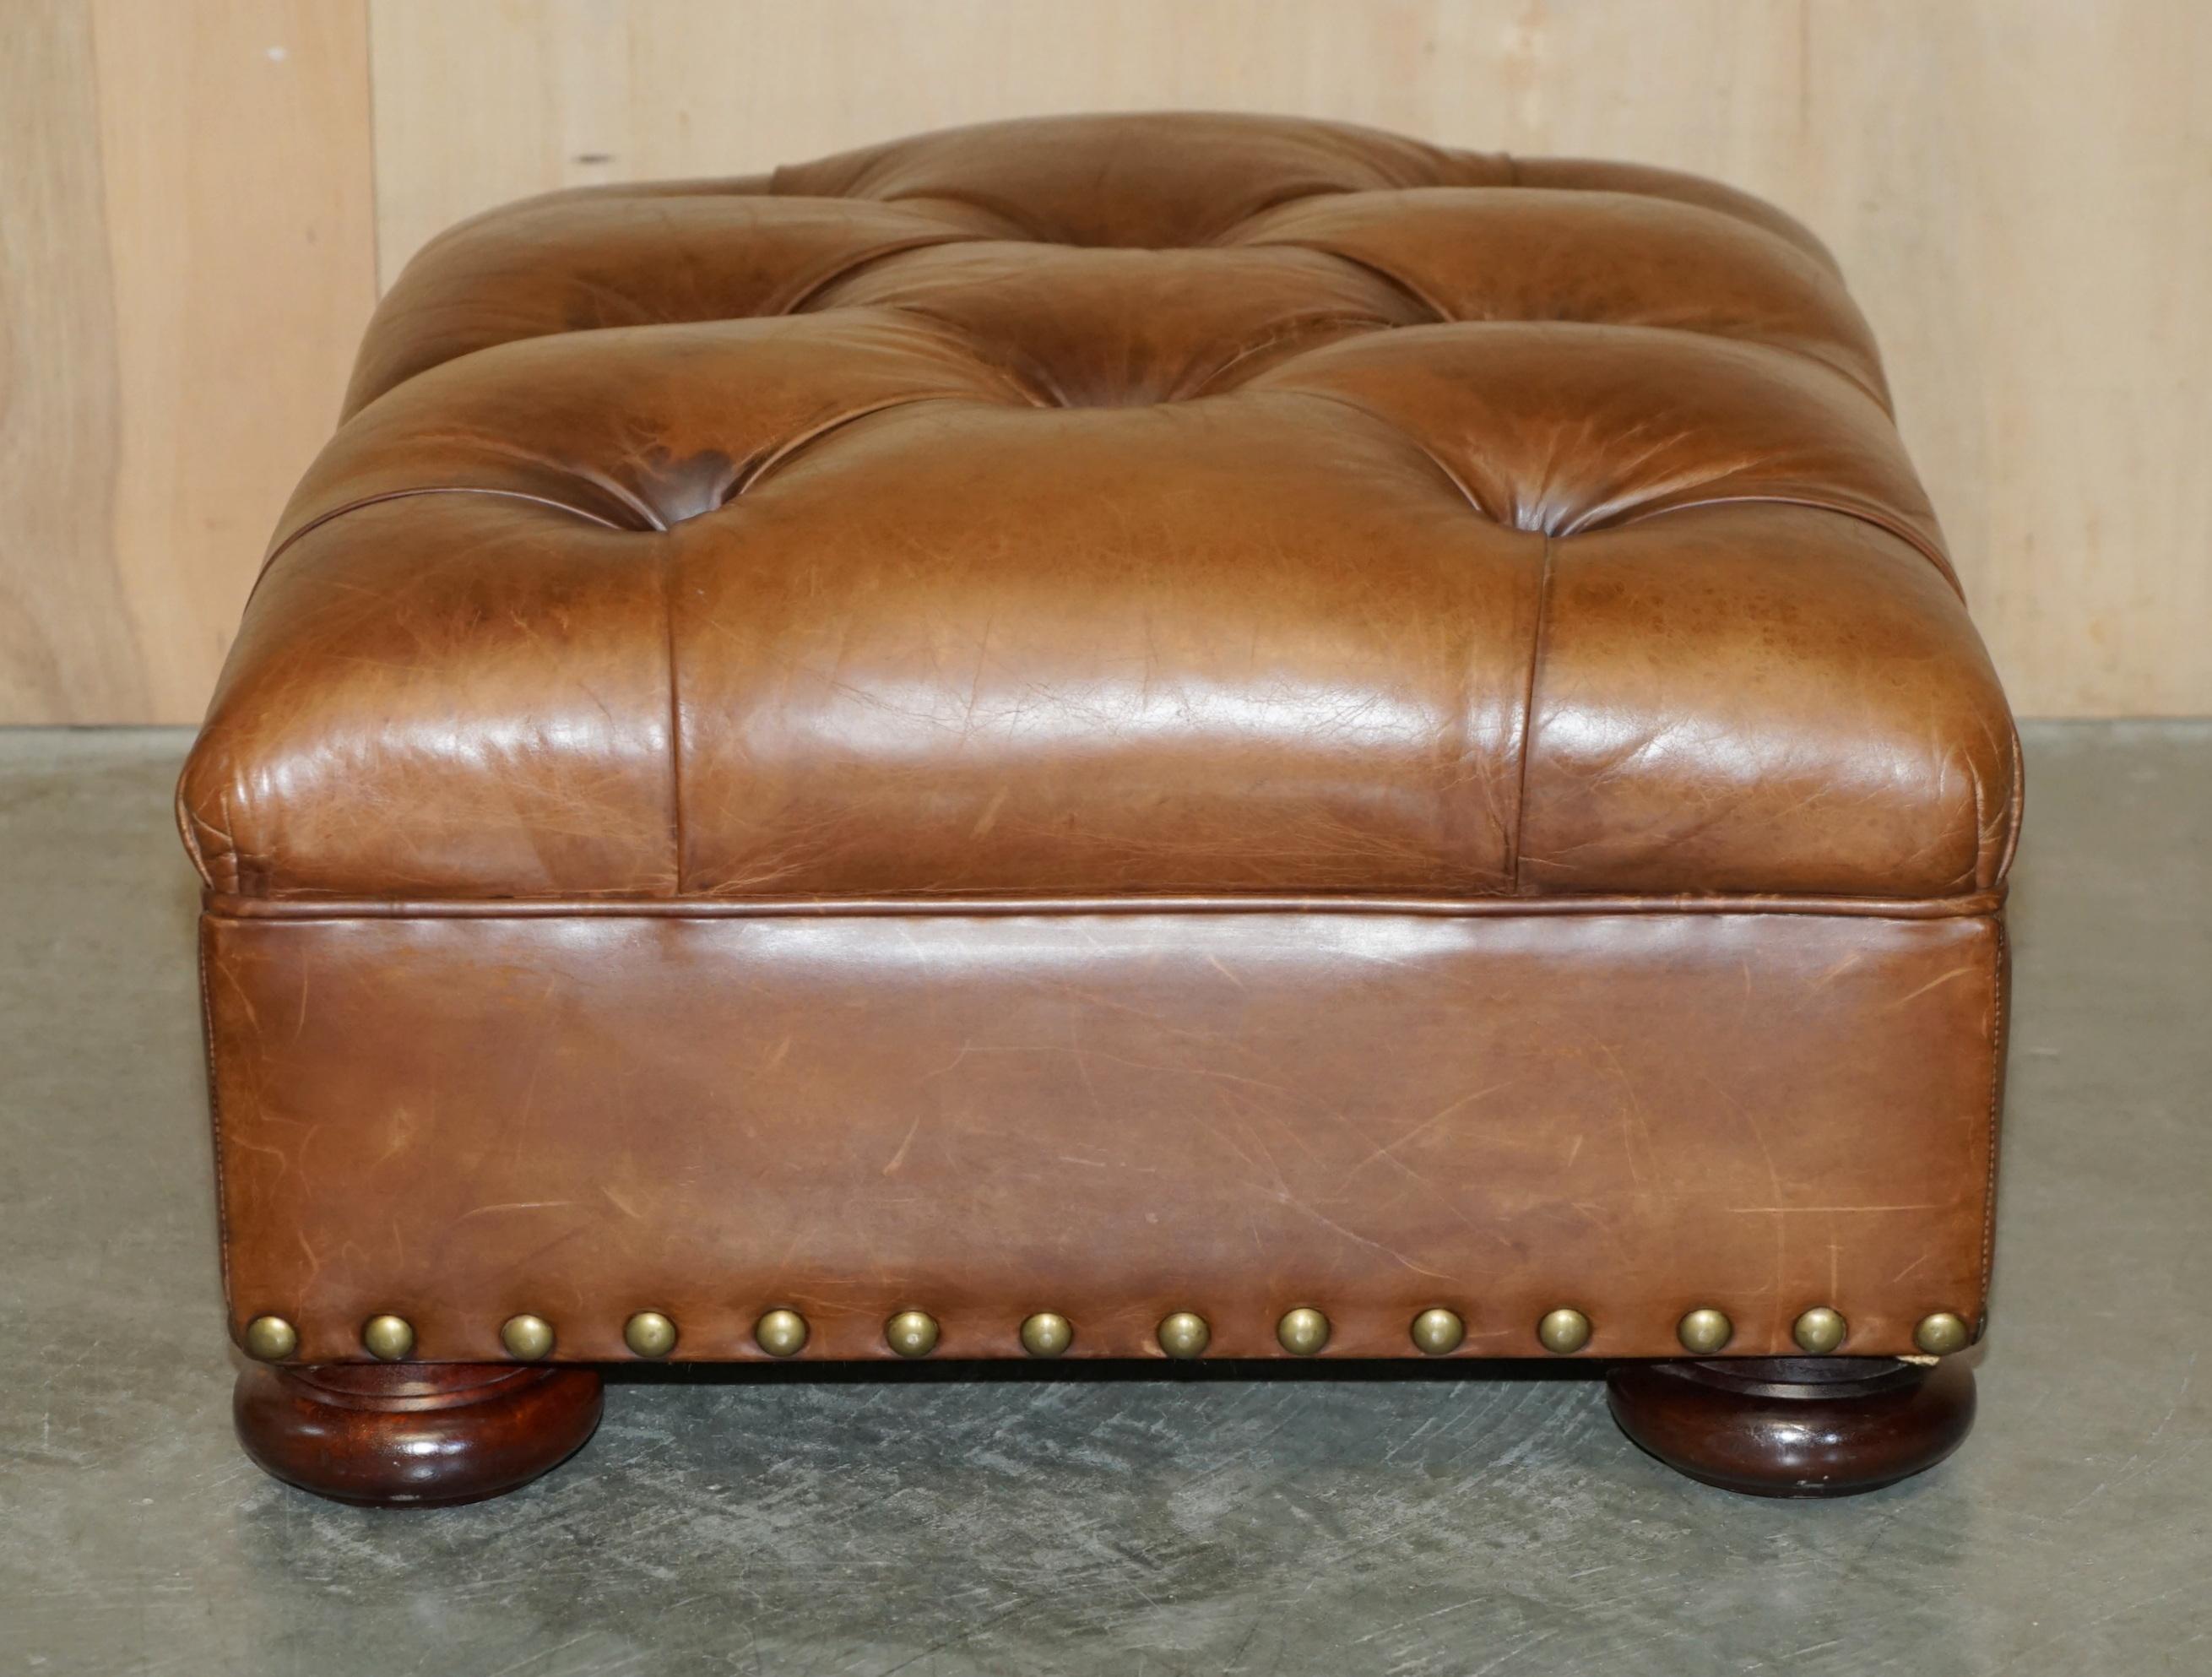 RALPH LAUREN WRITER'S CHESTERFIELD FOOTSTOOL OTTOMAN IN HERiTAGE BROWN LEATHER For Sale 8